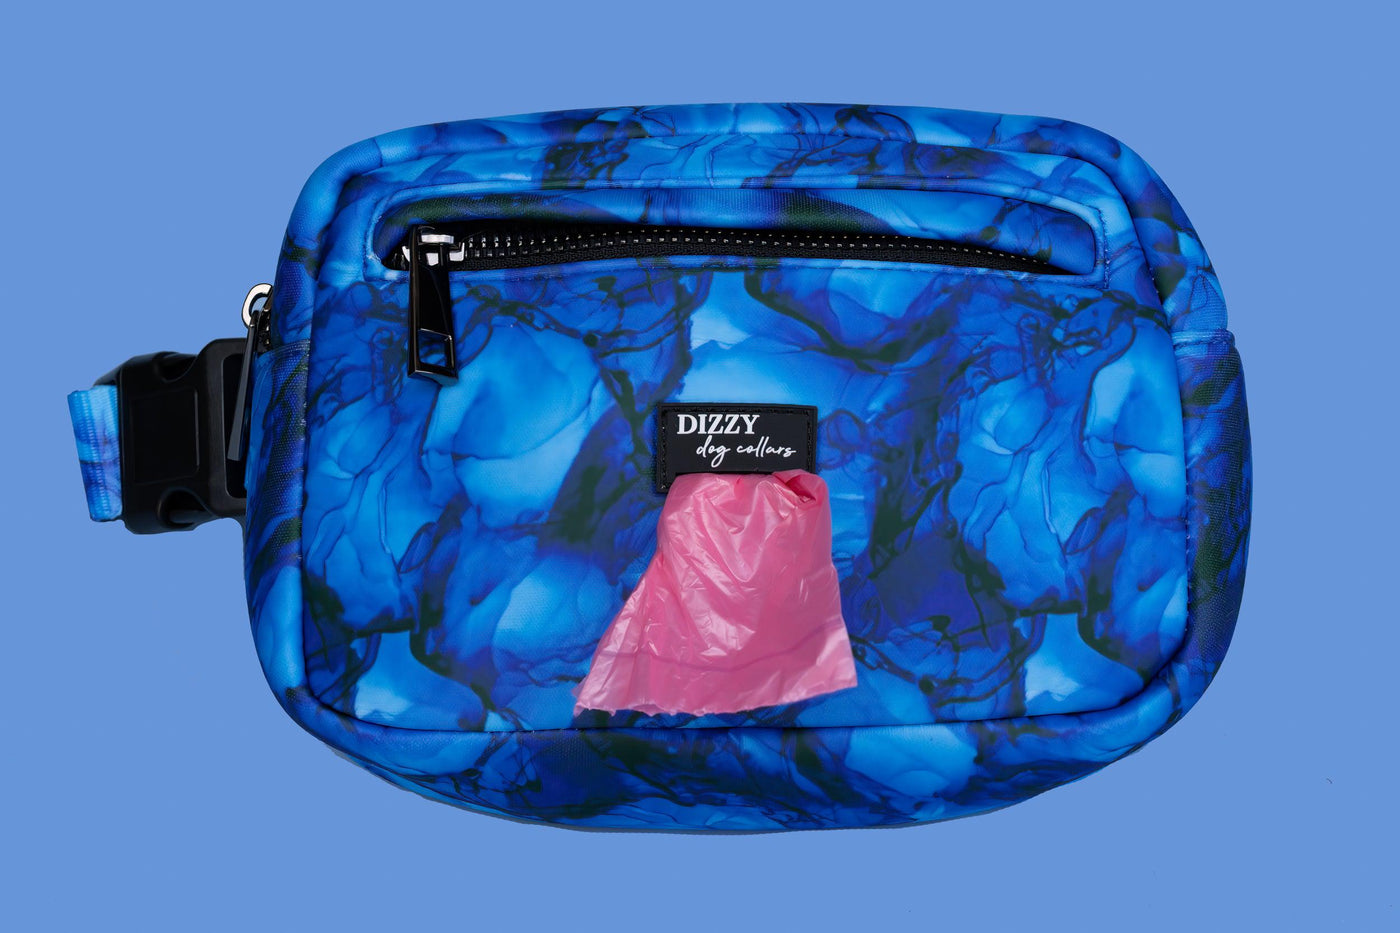 Adventure Pouch - Blue Marble-Dizzy Dog Collars